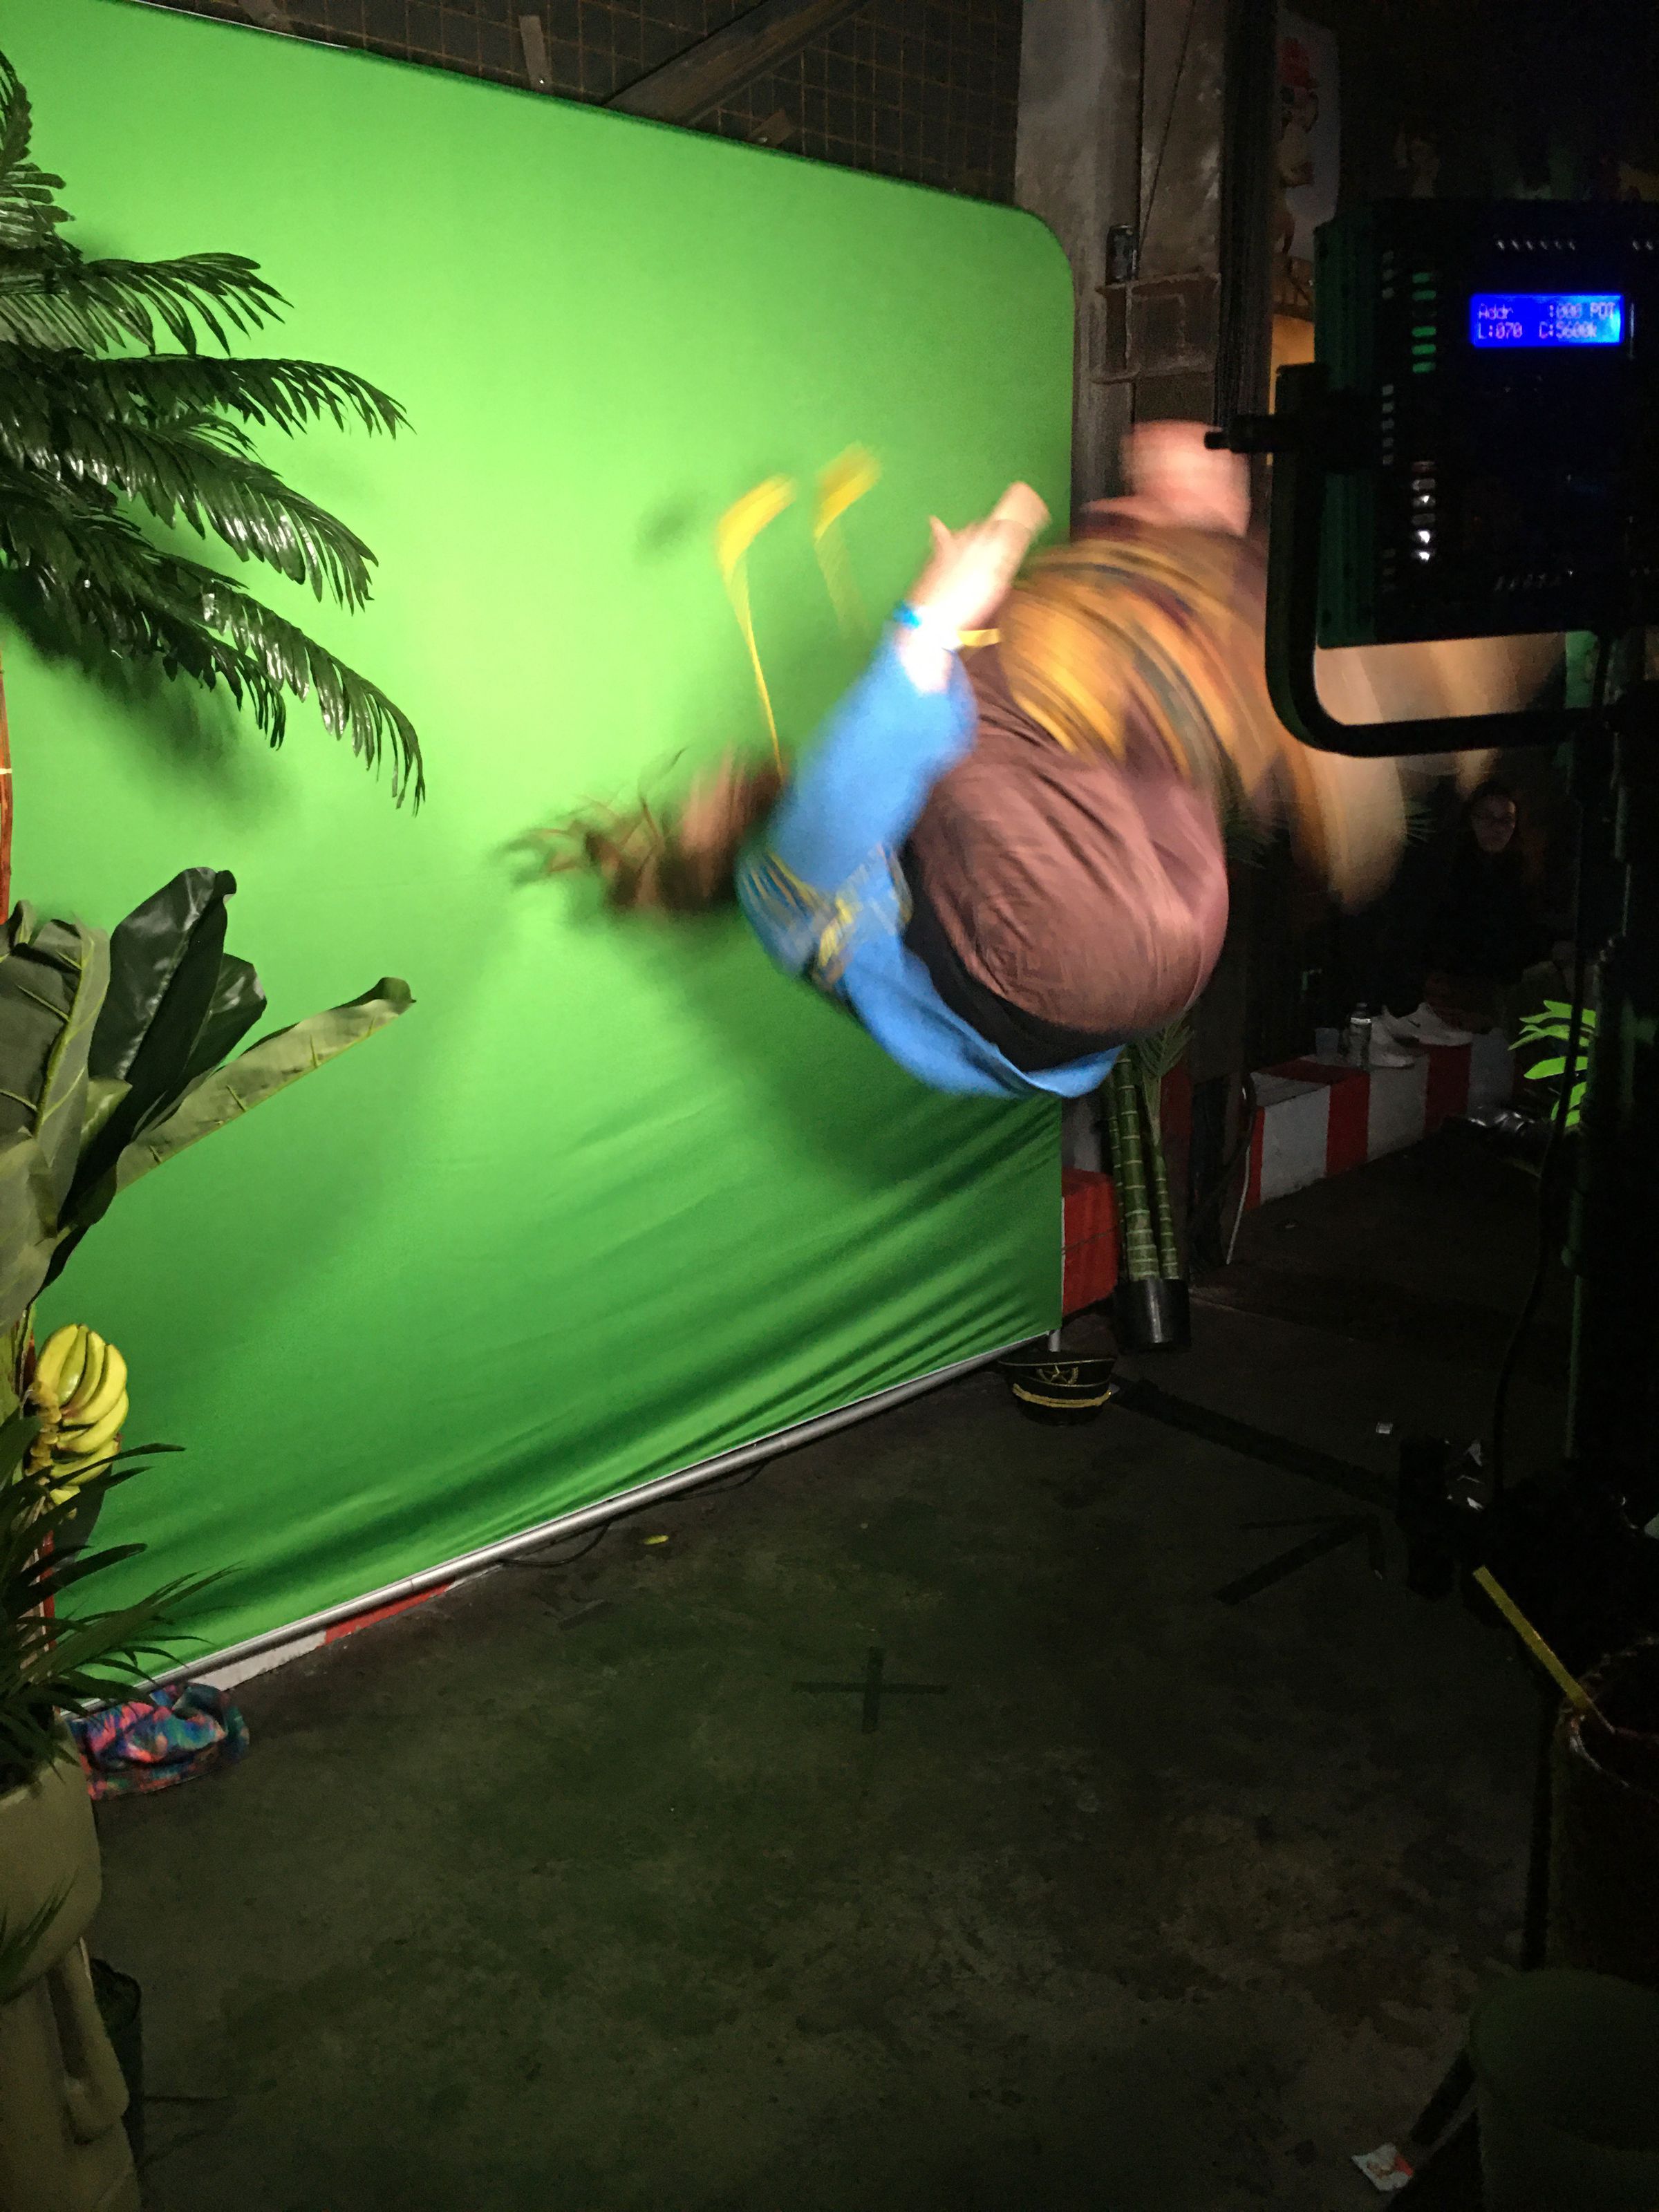 A Bored Ape attendee attempts a backflip at the photo booth